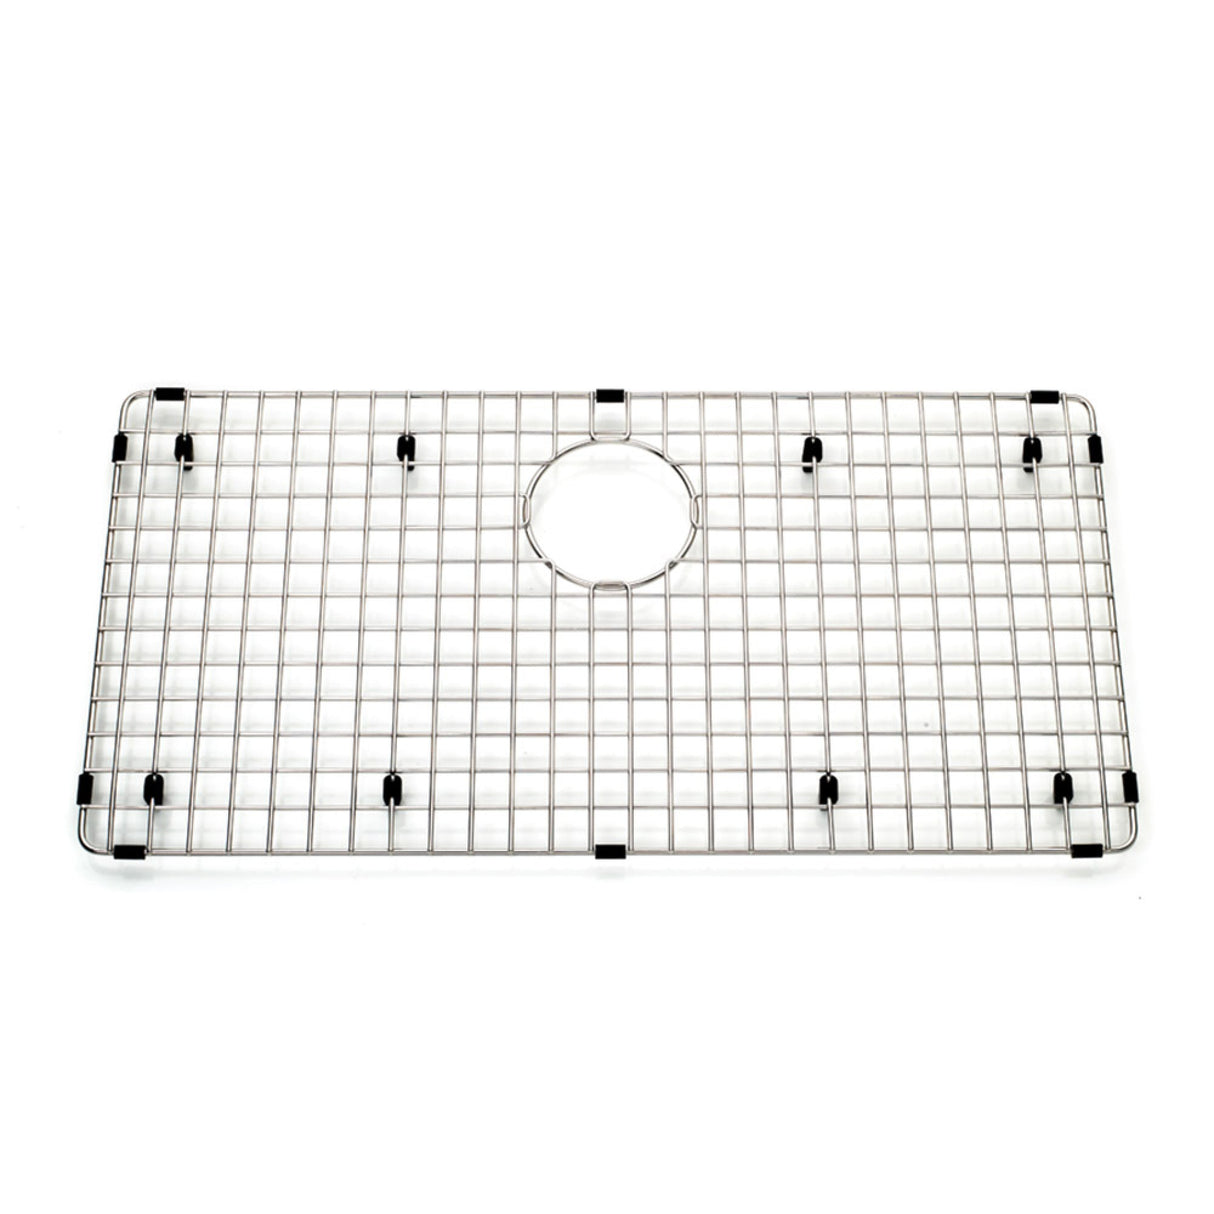 KINDRED BG240S Stainless Steel Bottom Grid for Sink 14.25-in x 27.25-in In Stainless Steel